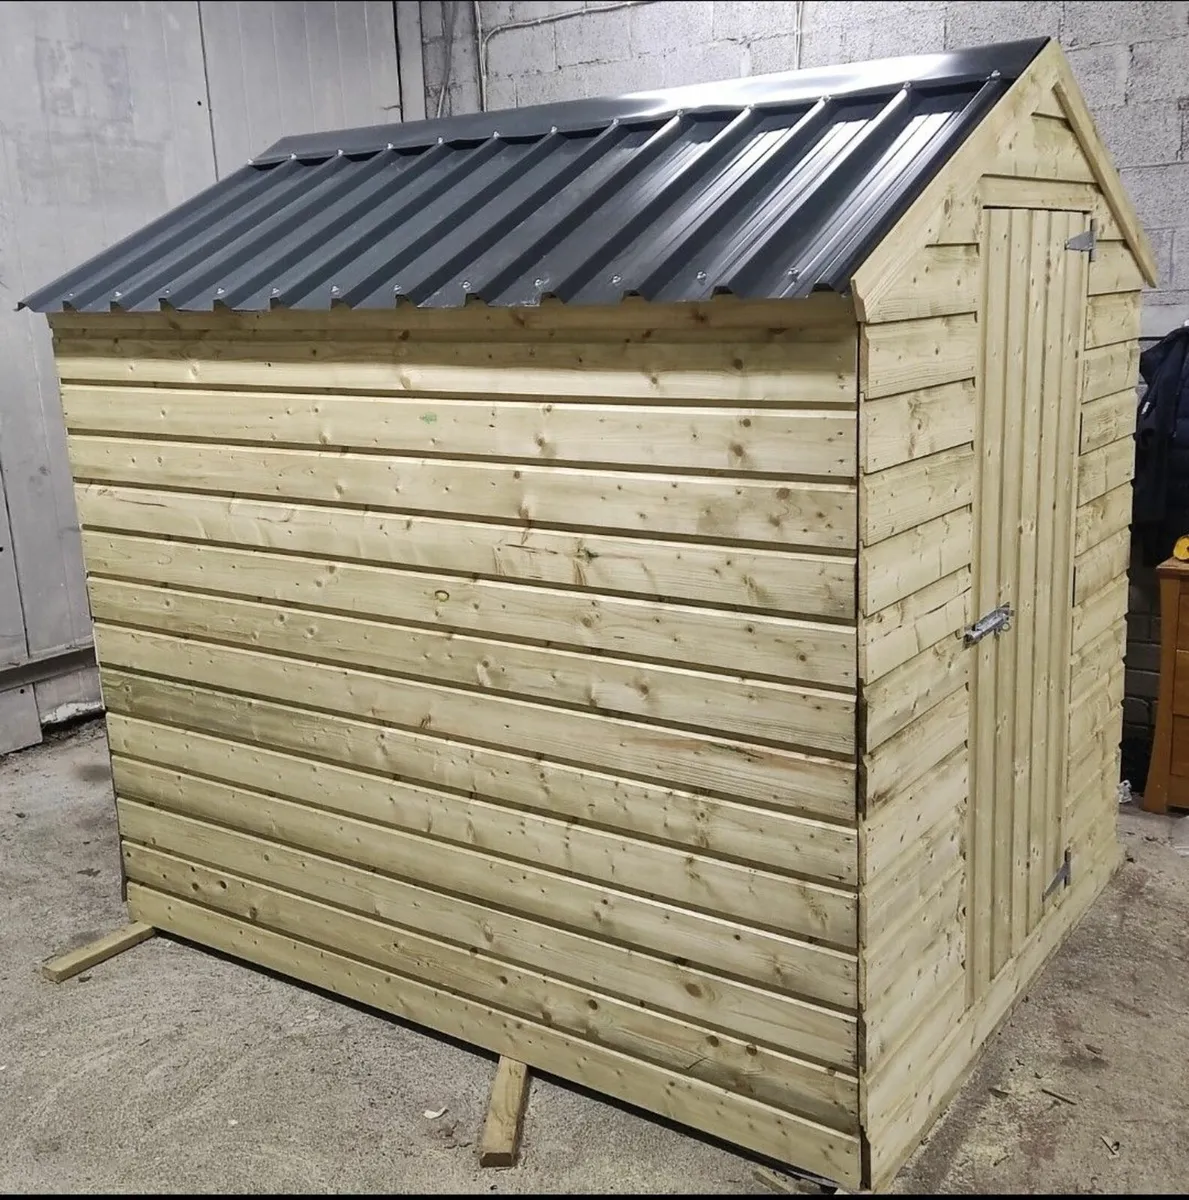 8x6 Garden Shed - Hand Built - Image 1